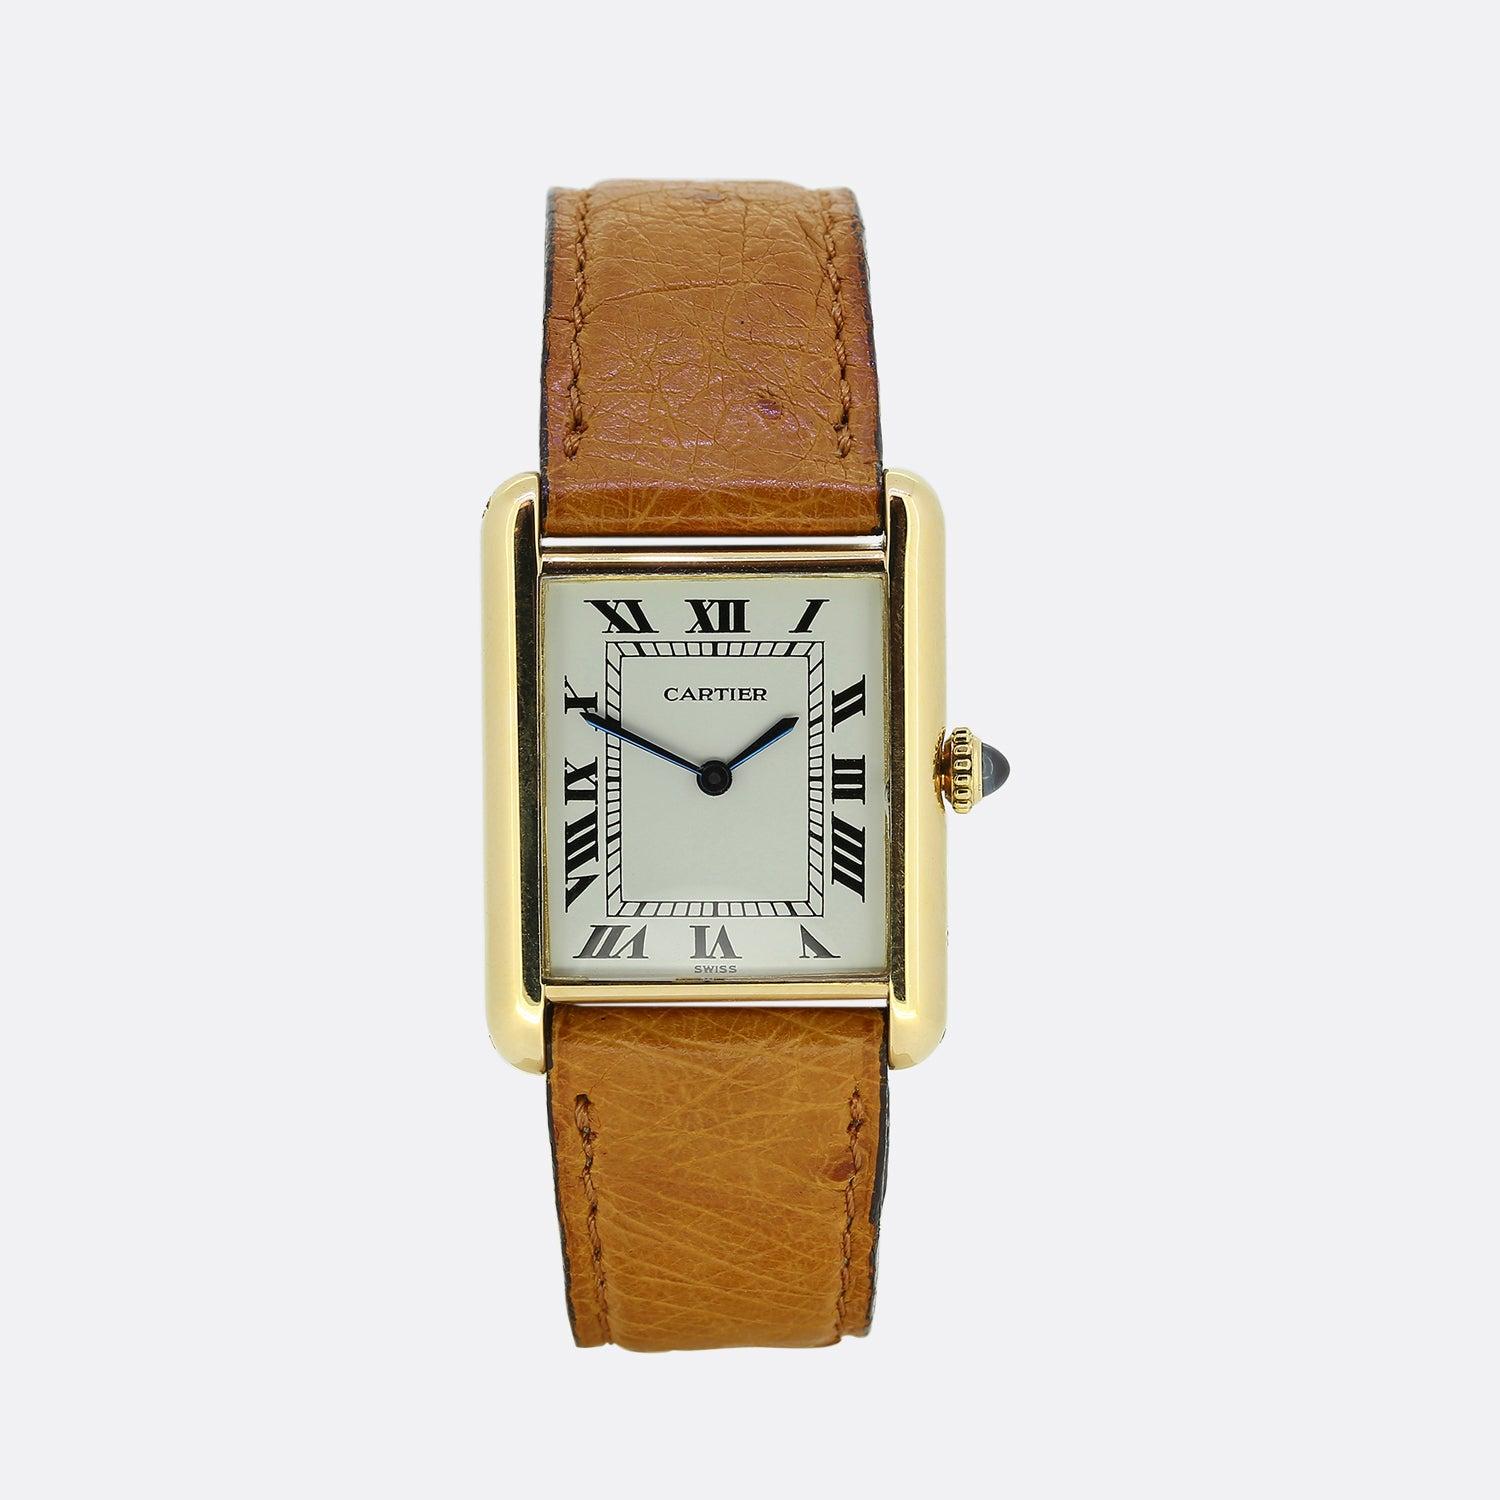 Here we have a classic and quintessential timepiece from the world renowned jewellery house of Cartier. The Cartier Tank has been an icon for over 100 years with its rectangular shaped case; in this respect crafted from 18ct yellow gold. The plain